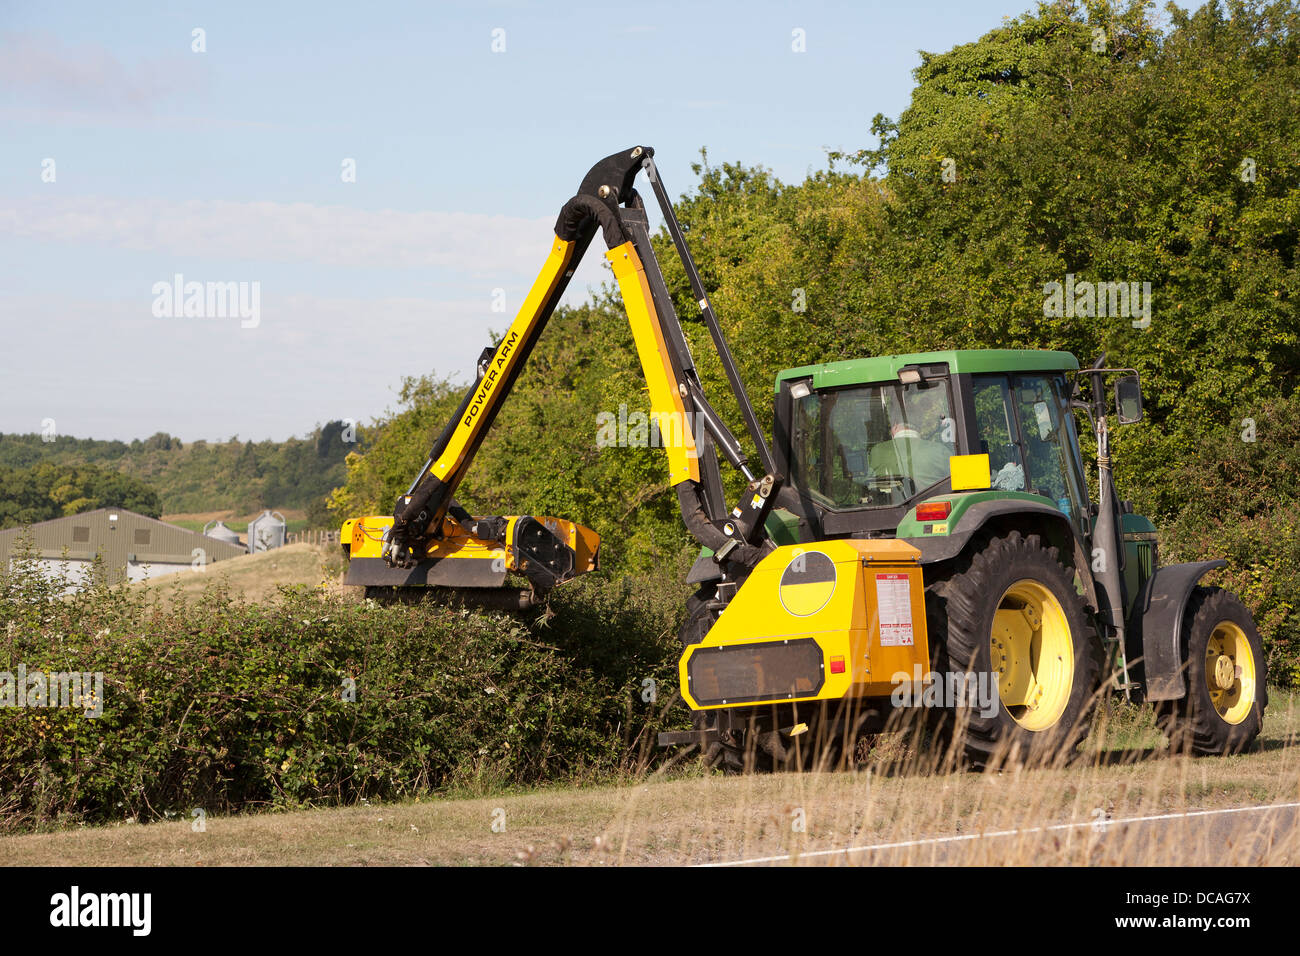 Green and Yellow John Deer tractor with hedge cutting arm in action trimming a hedge at the edge of a field in Oxfordshire, UK. Stock Photo